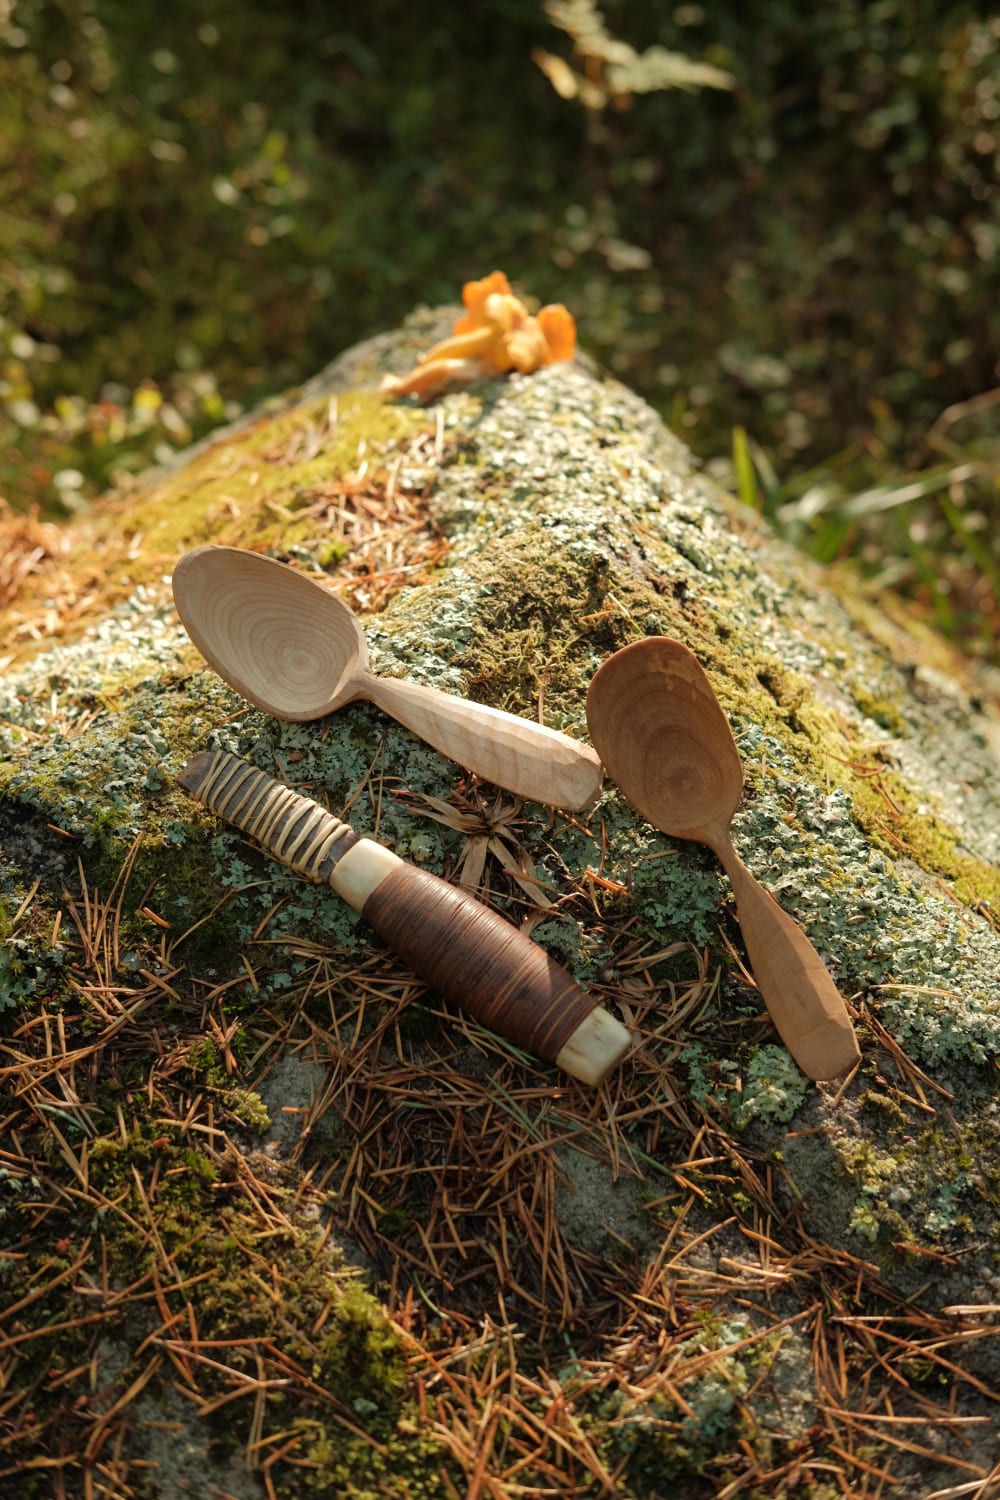 Anything better than carving and foraging in the woods with a bit of sun!